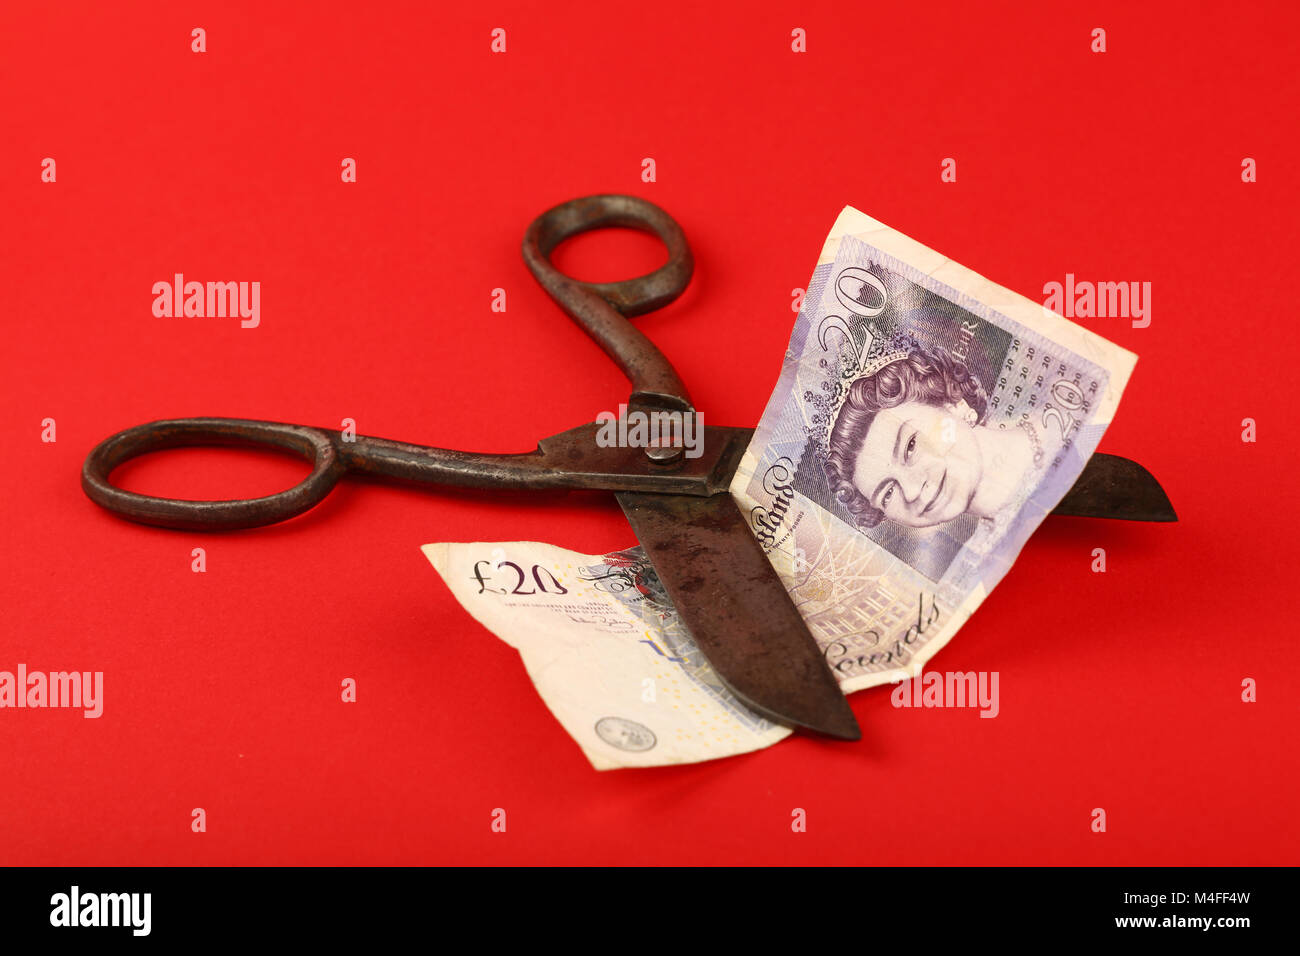 UK and Great Britain financial crisis, decline of British economy and pound illustrated, old vintage scissors cut twenty pounds banknote over red Stock Photo